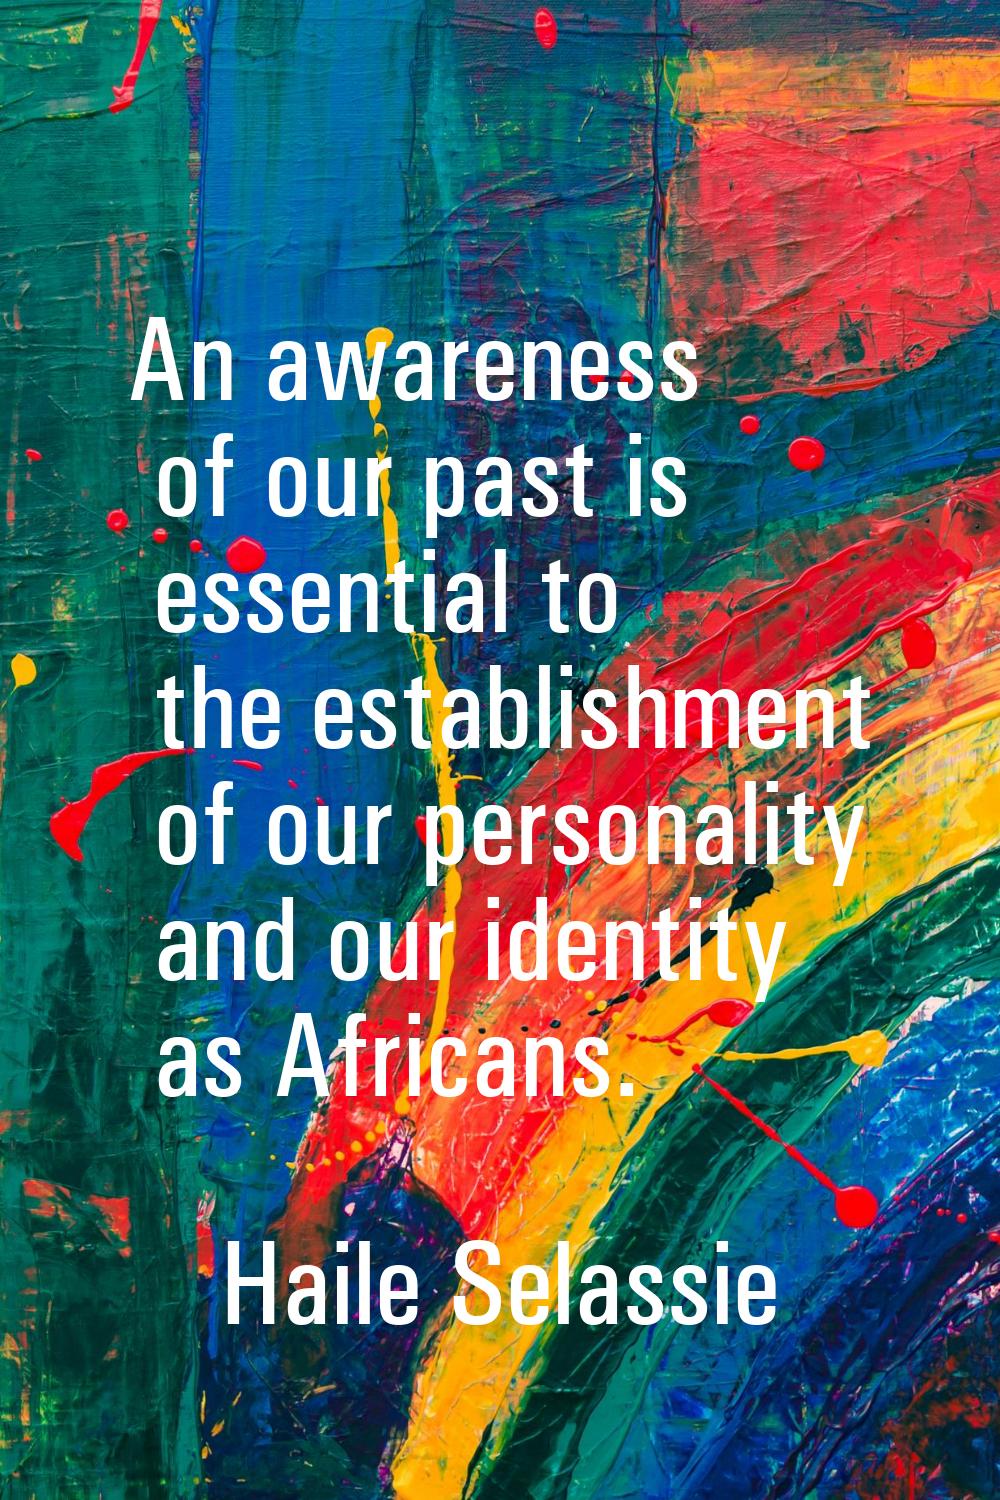 An awareness of our past is essential to the establishment of our personality and our identity as A